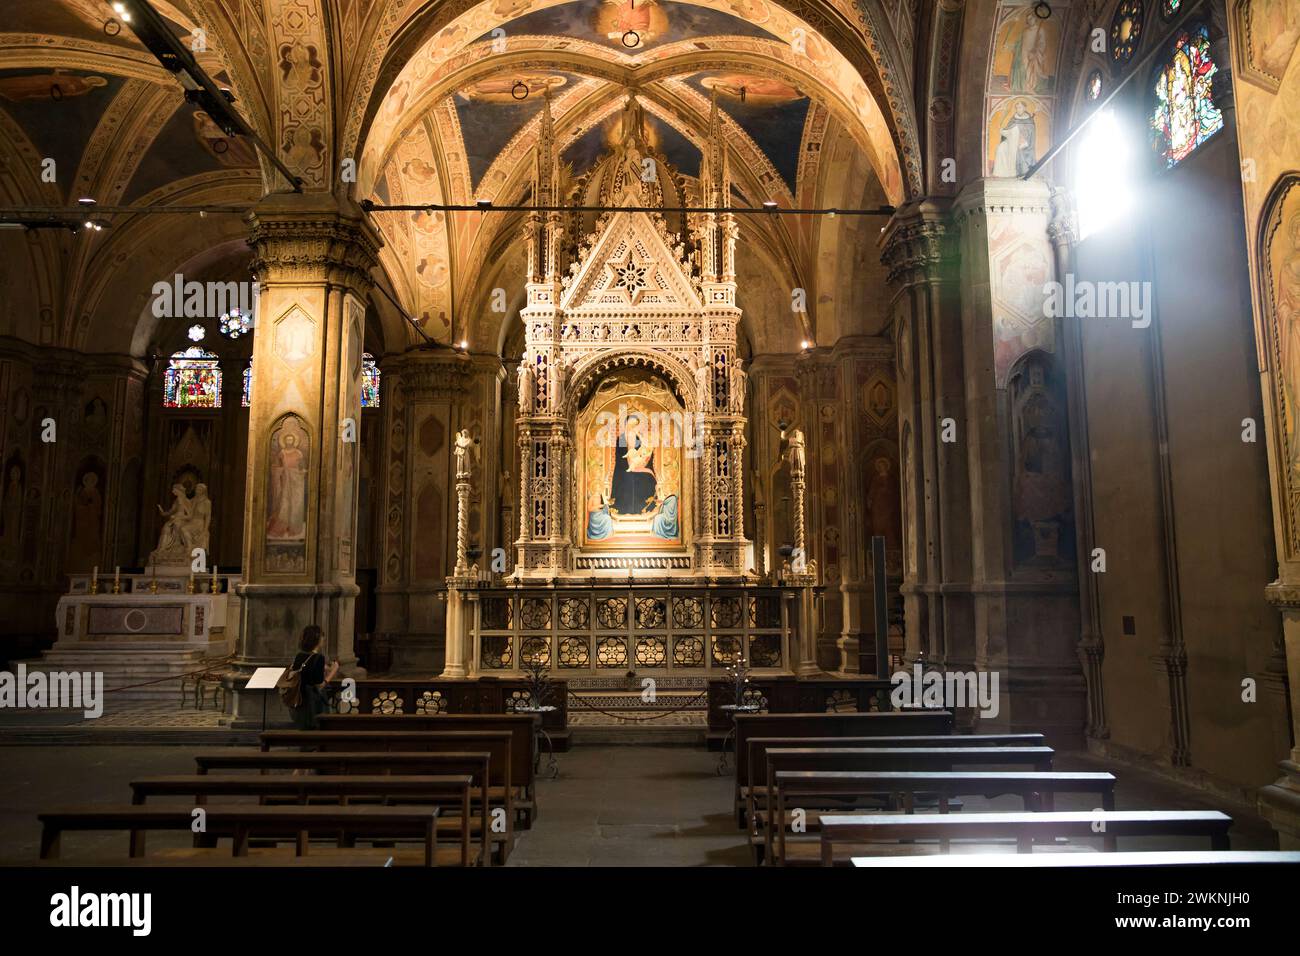 The Orsanmichele church, once a Gothic warehouse, was turned into a church after a image of the Madonna appeared inside. Many of Florence's masters co Stock Photo